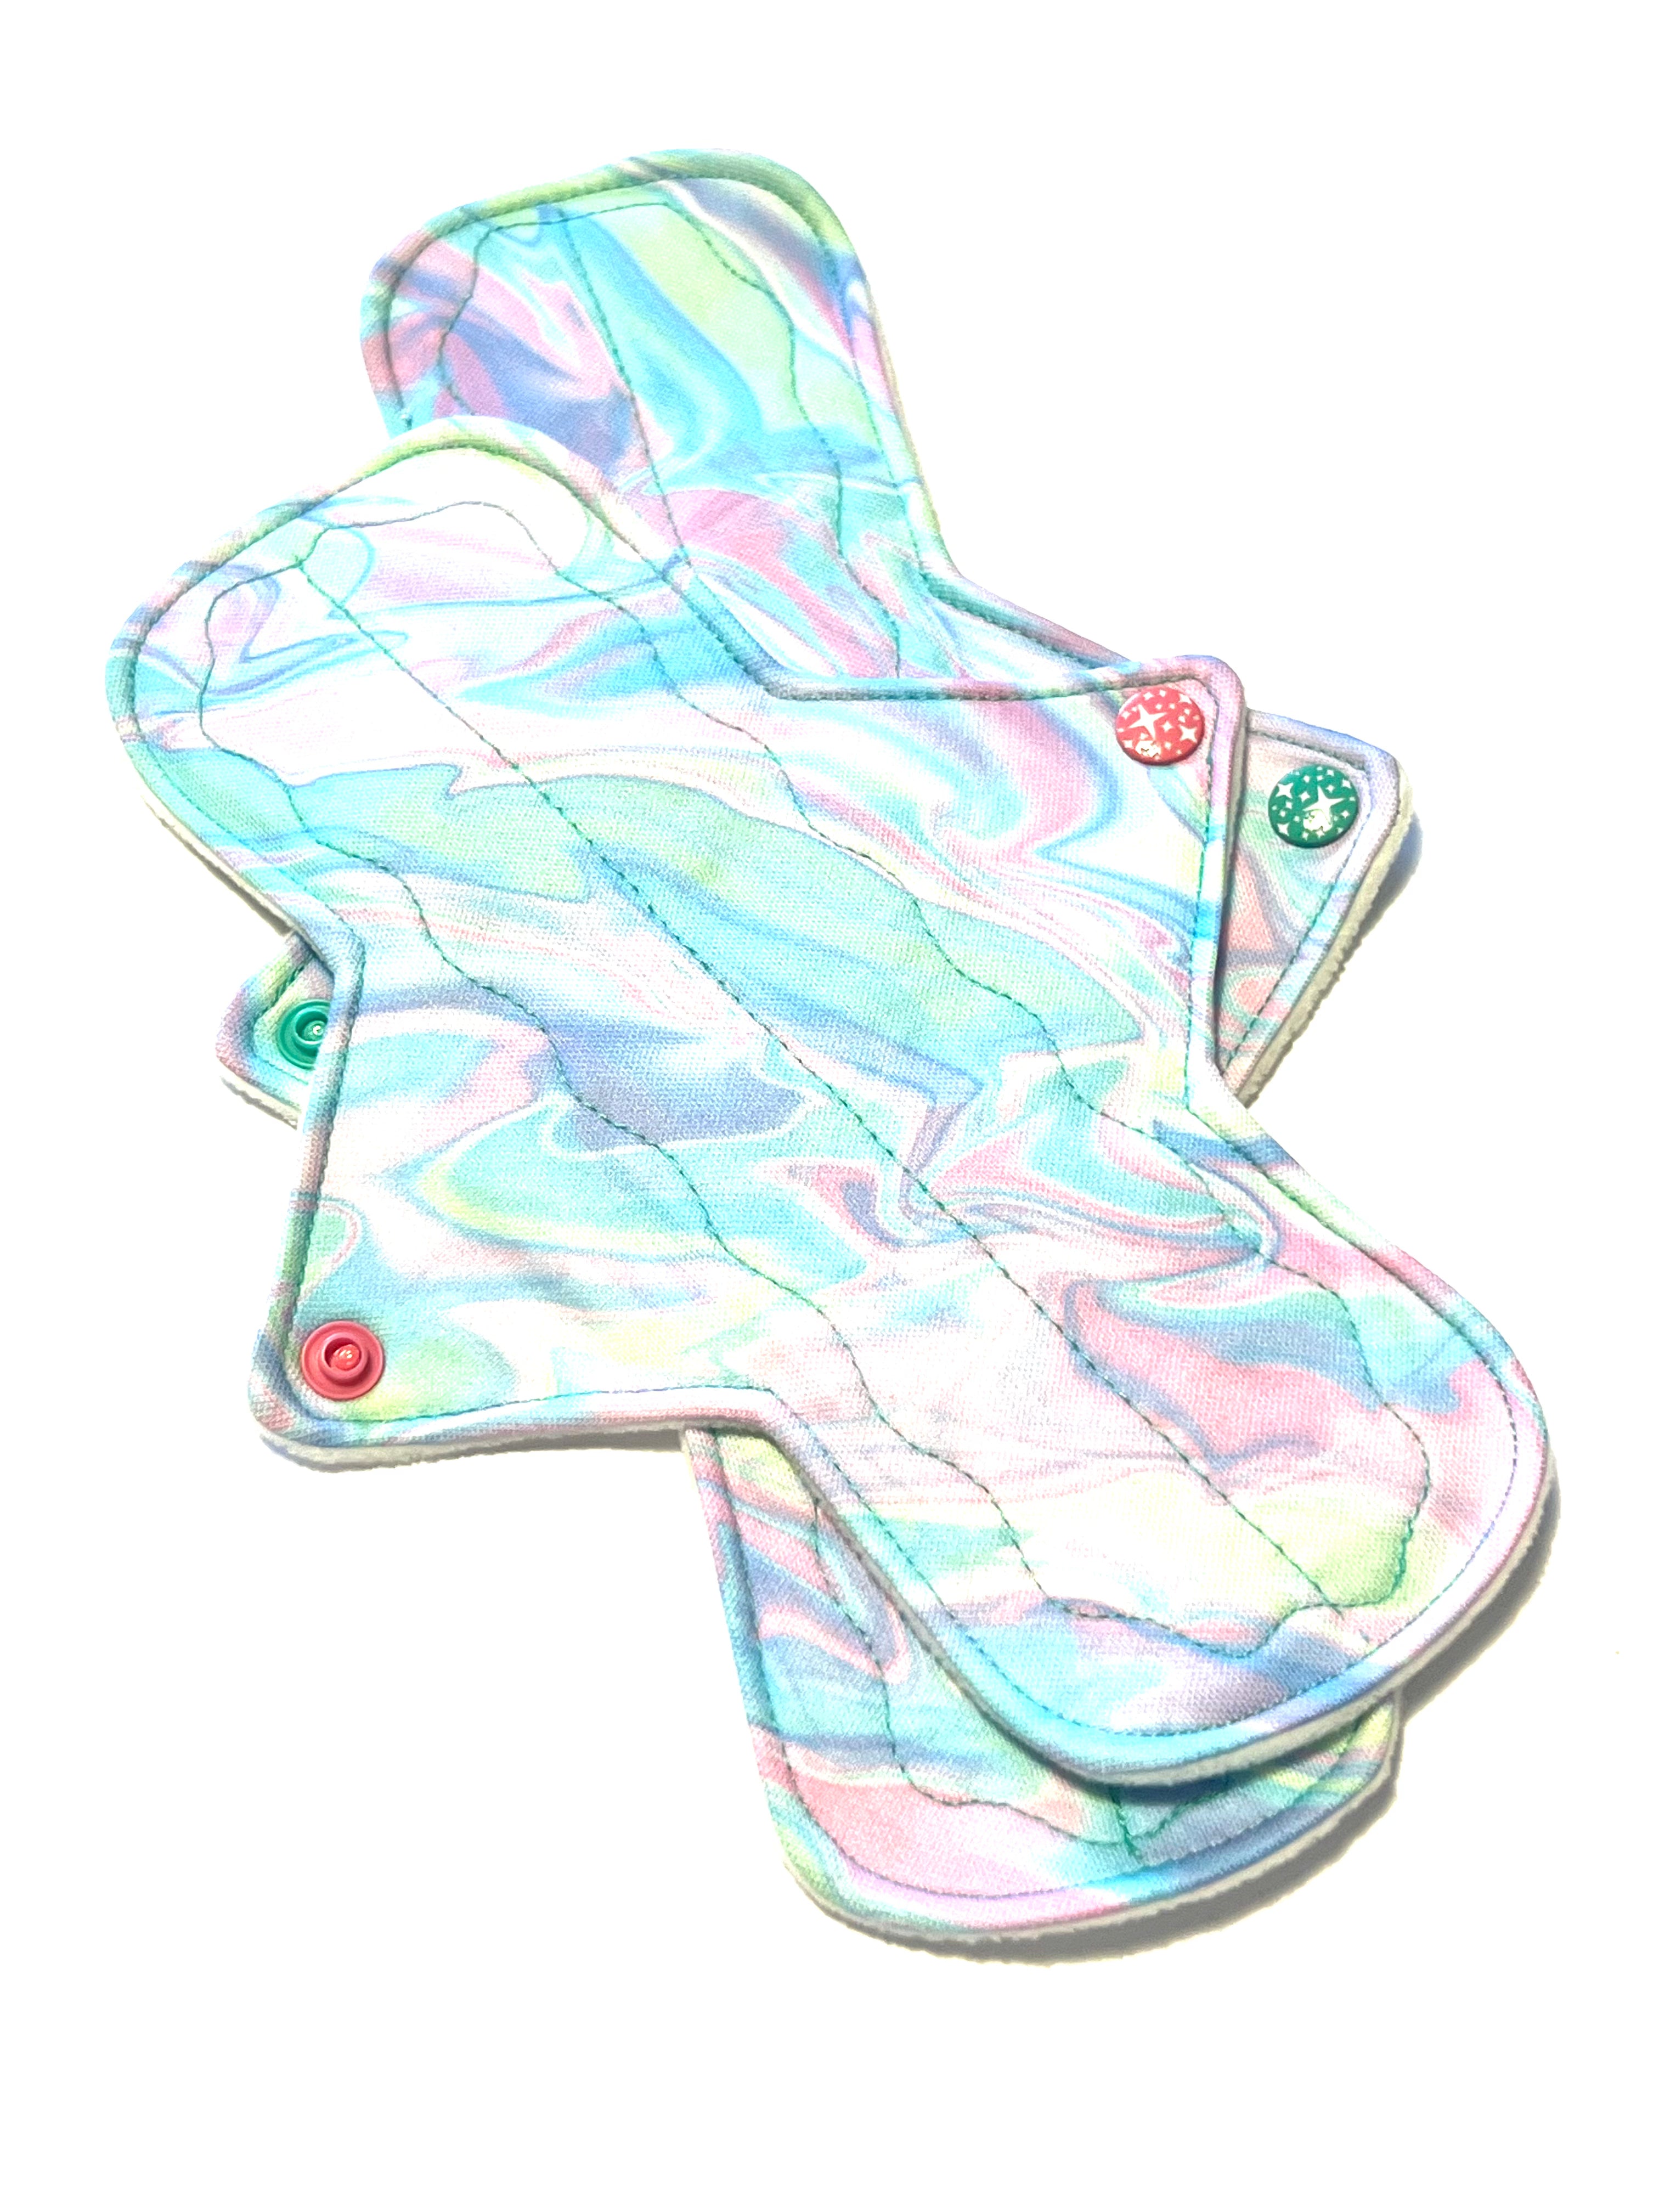 LIMITED EDITION Candy Swirl Performance Piqué 9 or 11 Inch Straight Style Reusable Cloth Pads